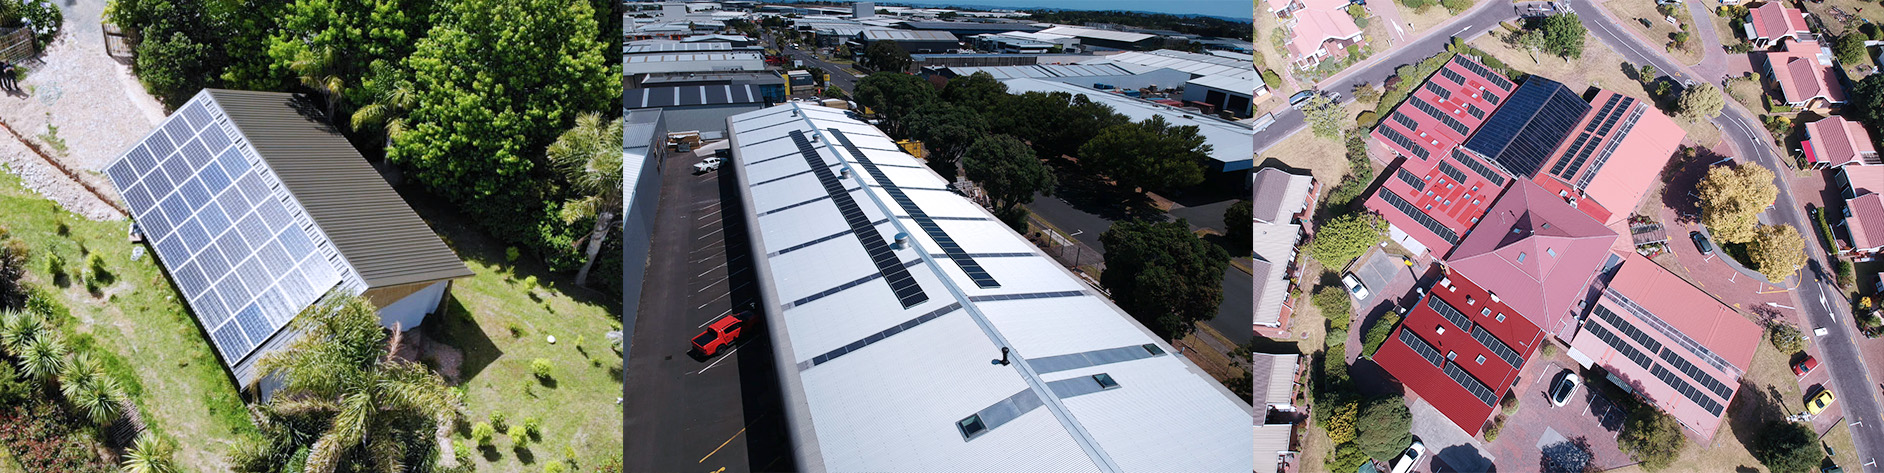 Trilect Solar | Commercial & Residential Solar Auckland